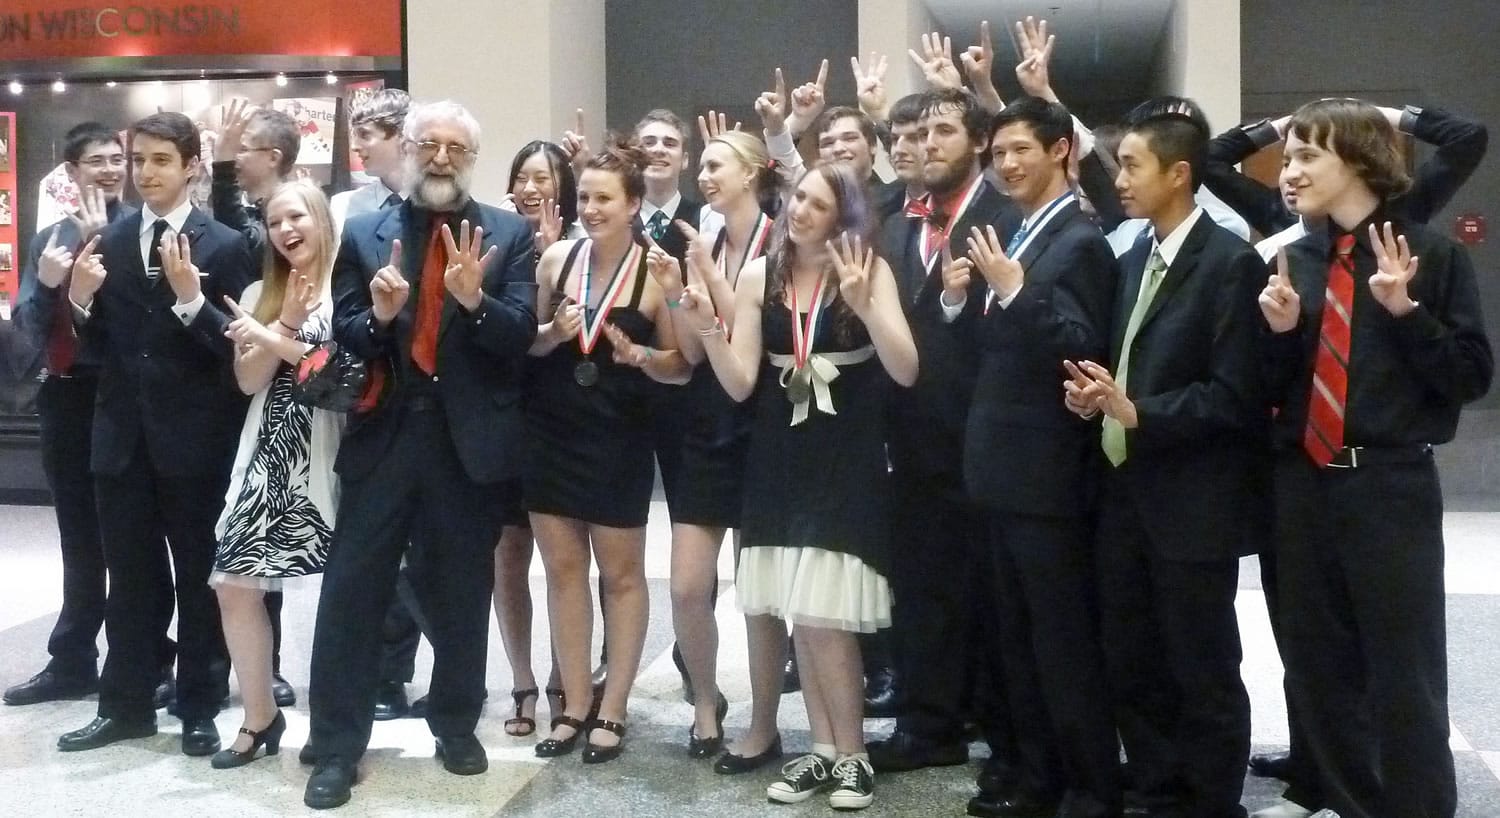 The Camas High School Science Olympiad celebrates their 14th place win at the National Science Olympiad tournament in Madison, Wis., on May 21.